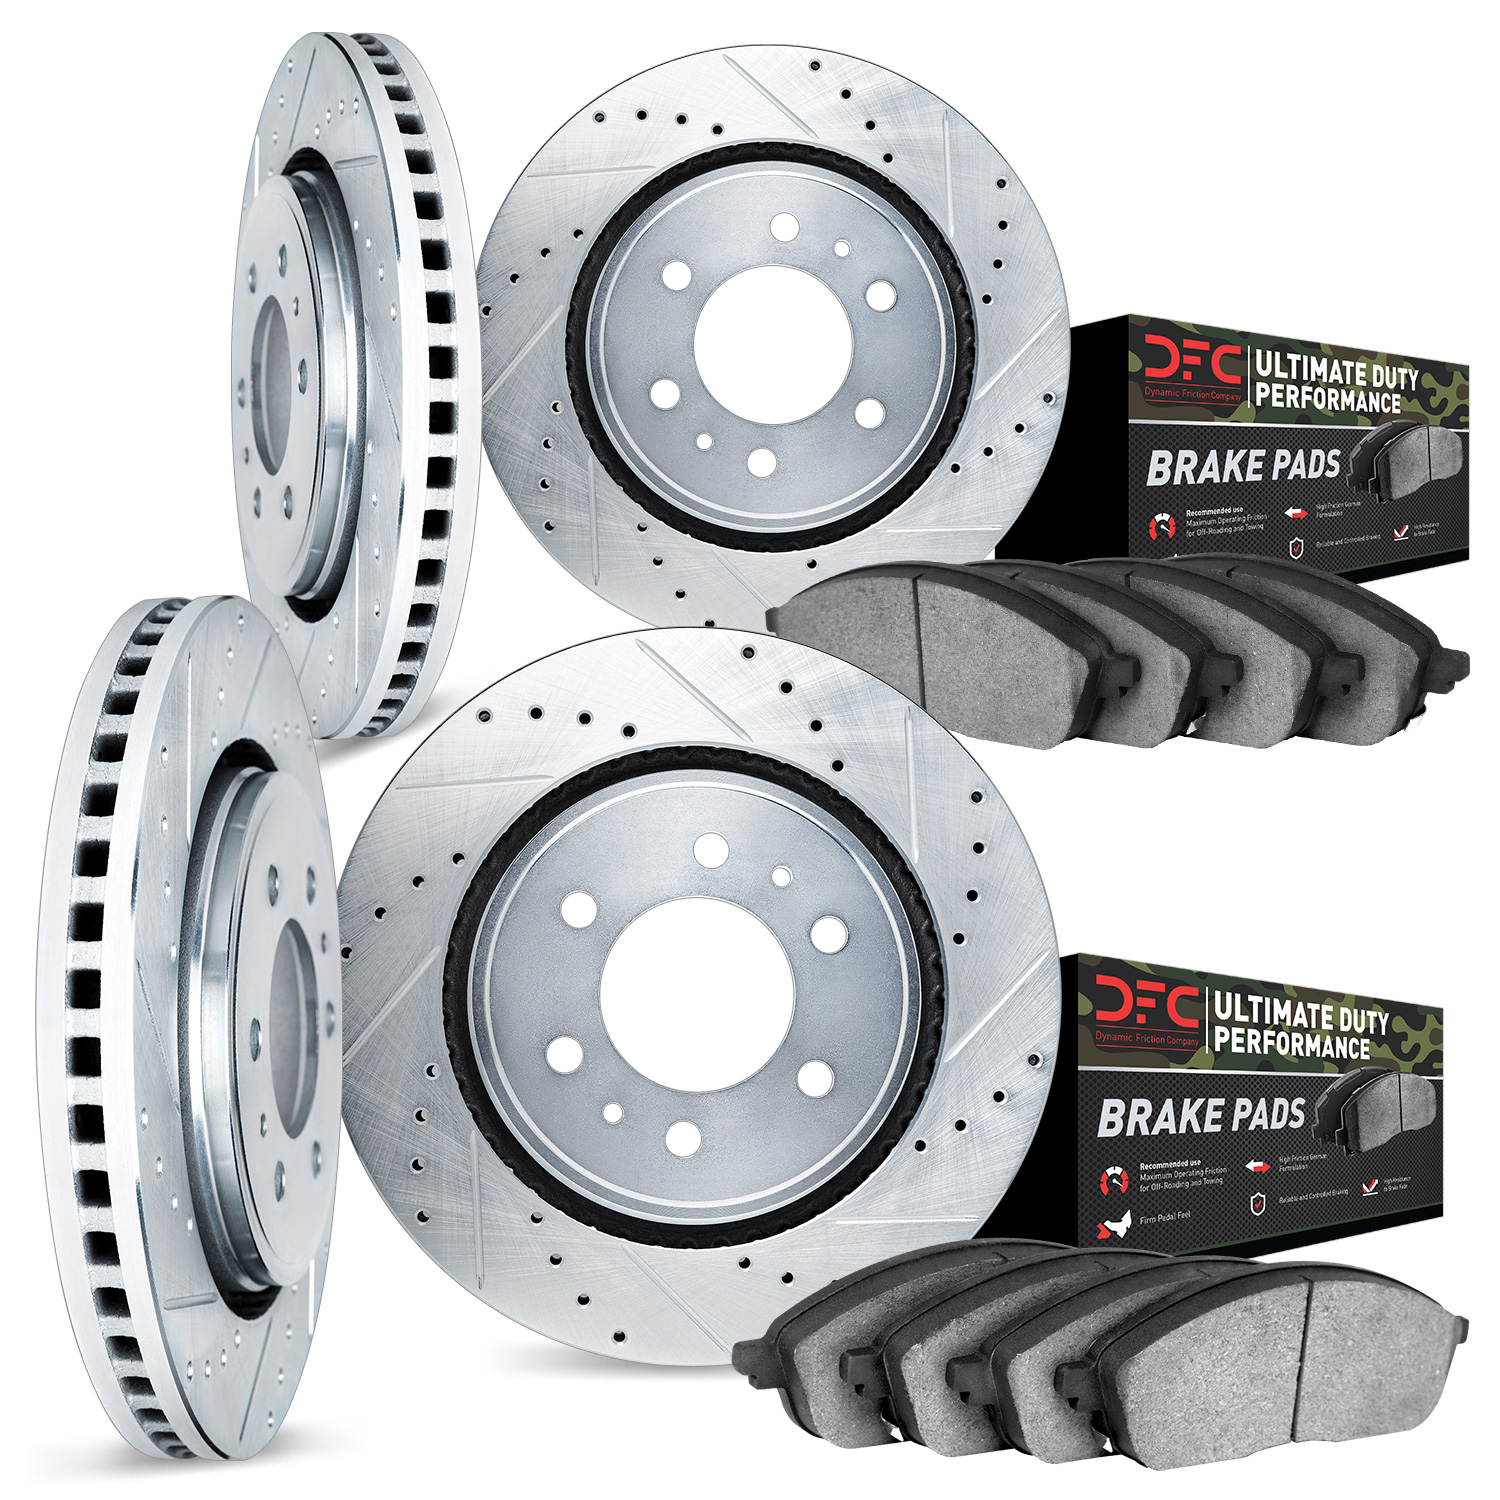 7404-54049 Drilled/Slotted Brake Rotors with Ultimate-Duty Brake Pads Kit [Silver], 2012-2020 Ford/Lincoln/Mercury/Mazda, Positi